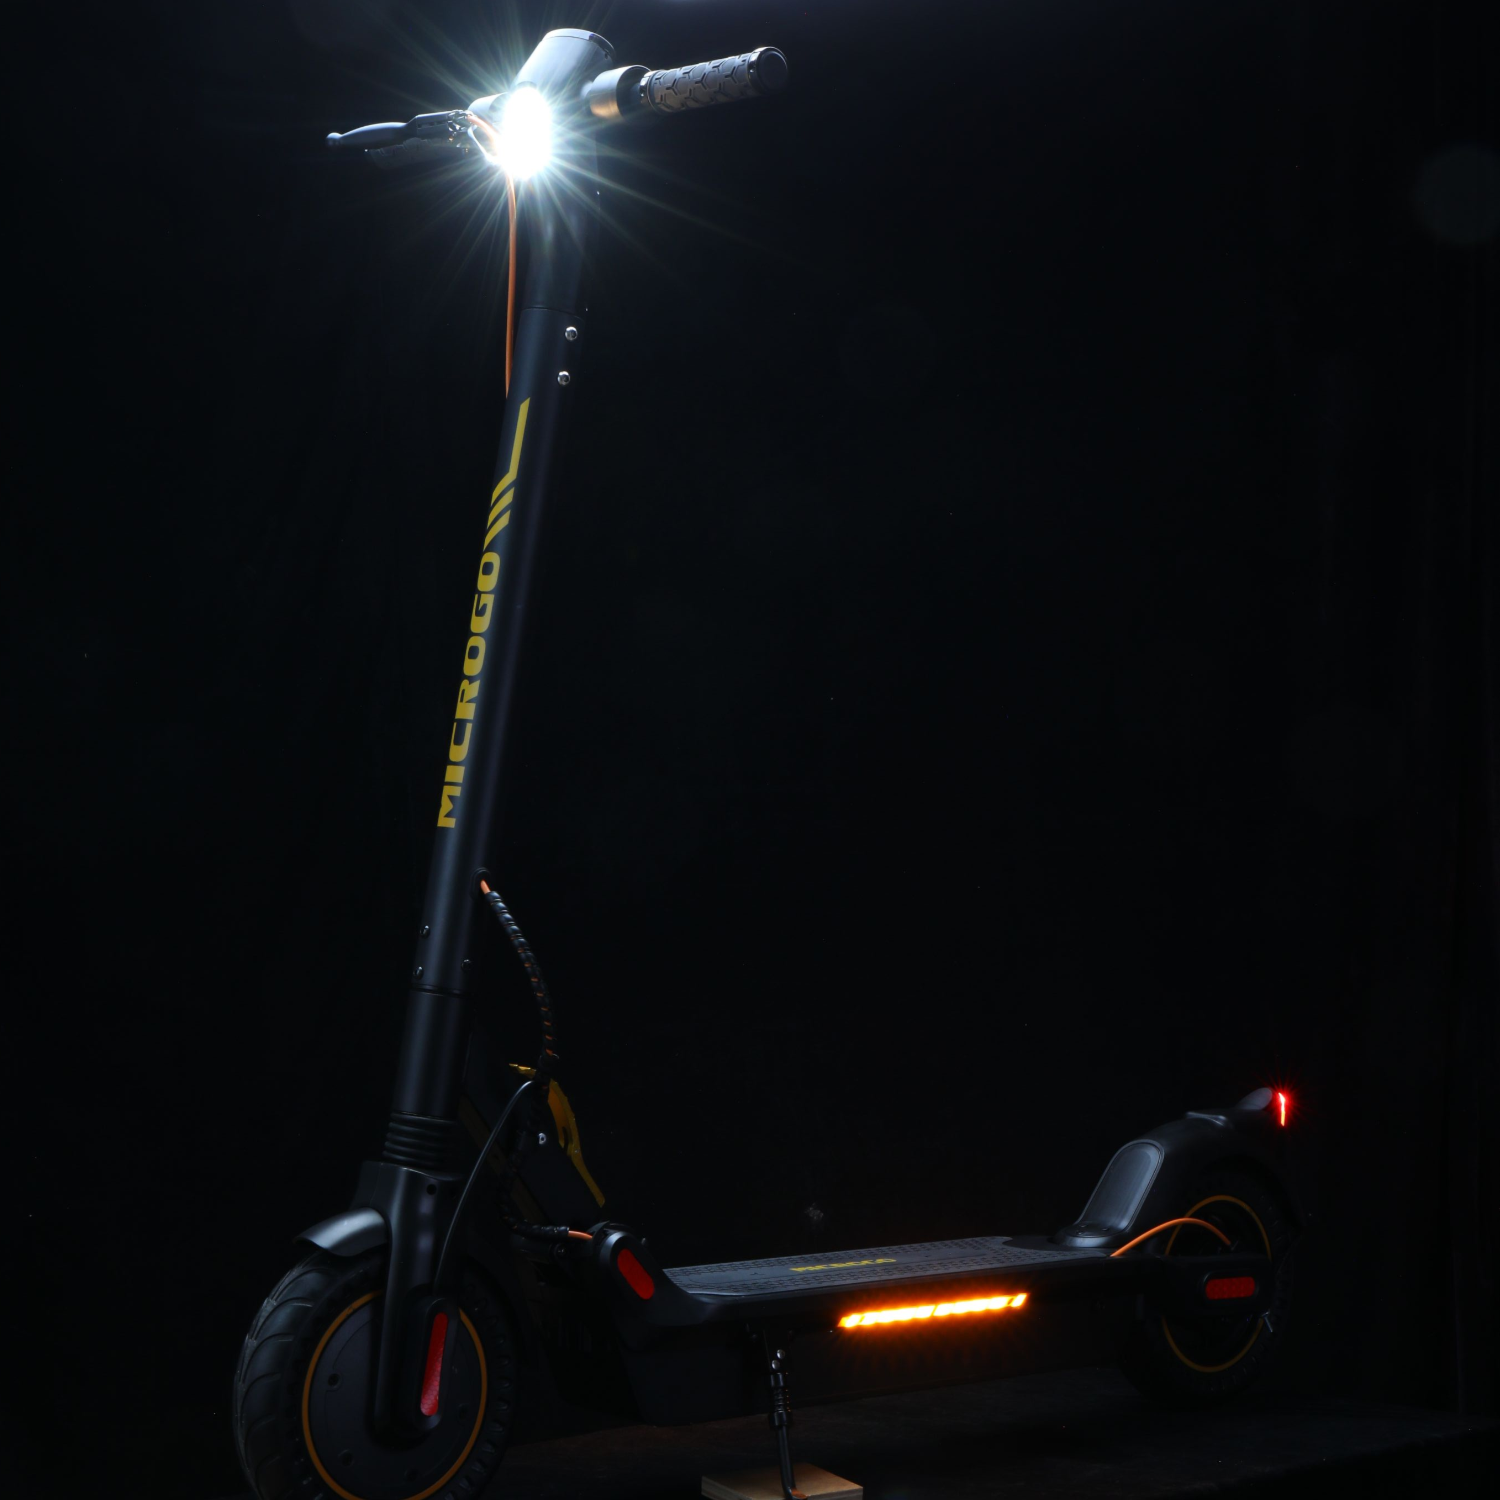 electric bike scooter